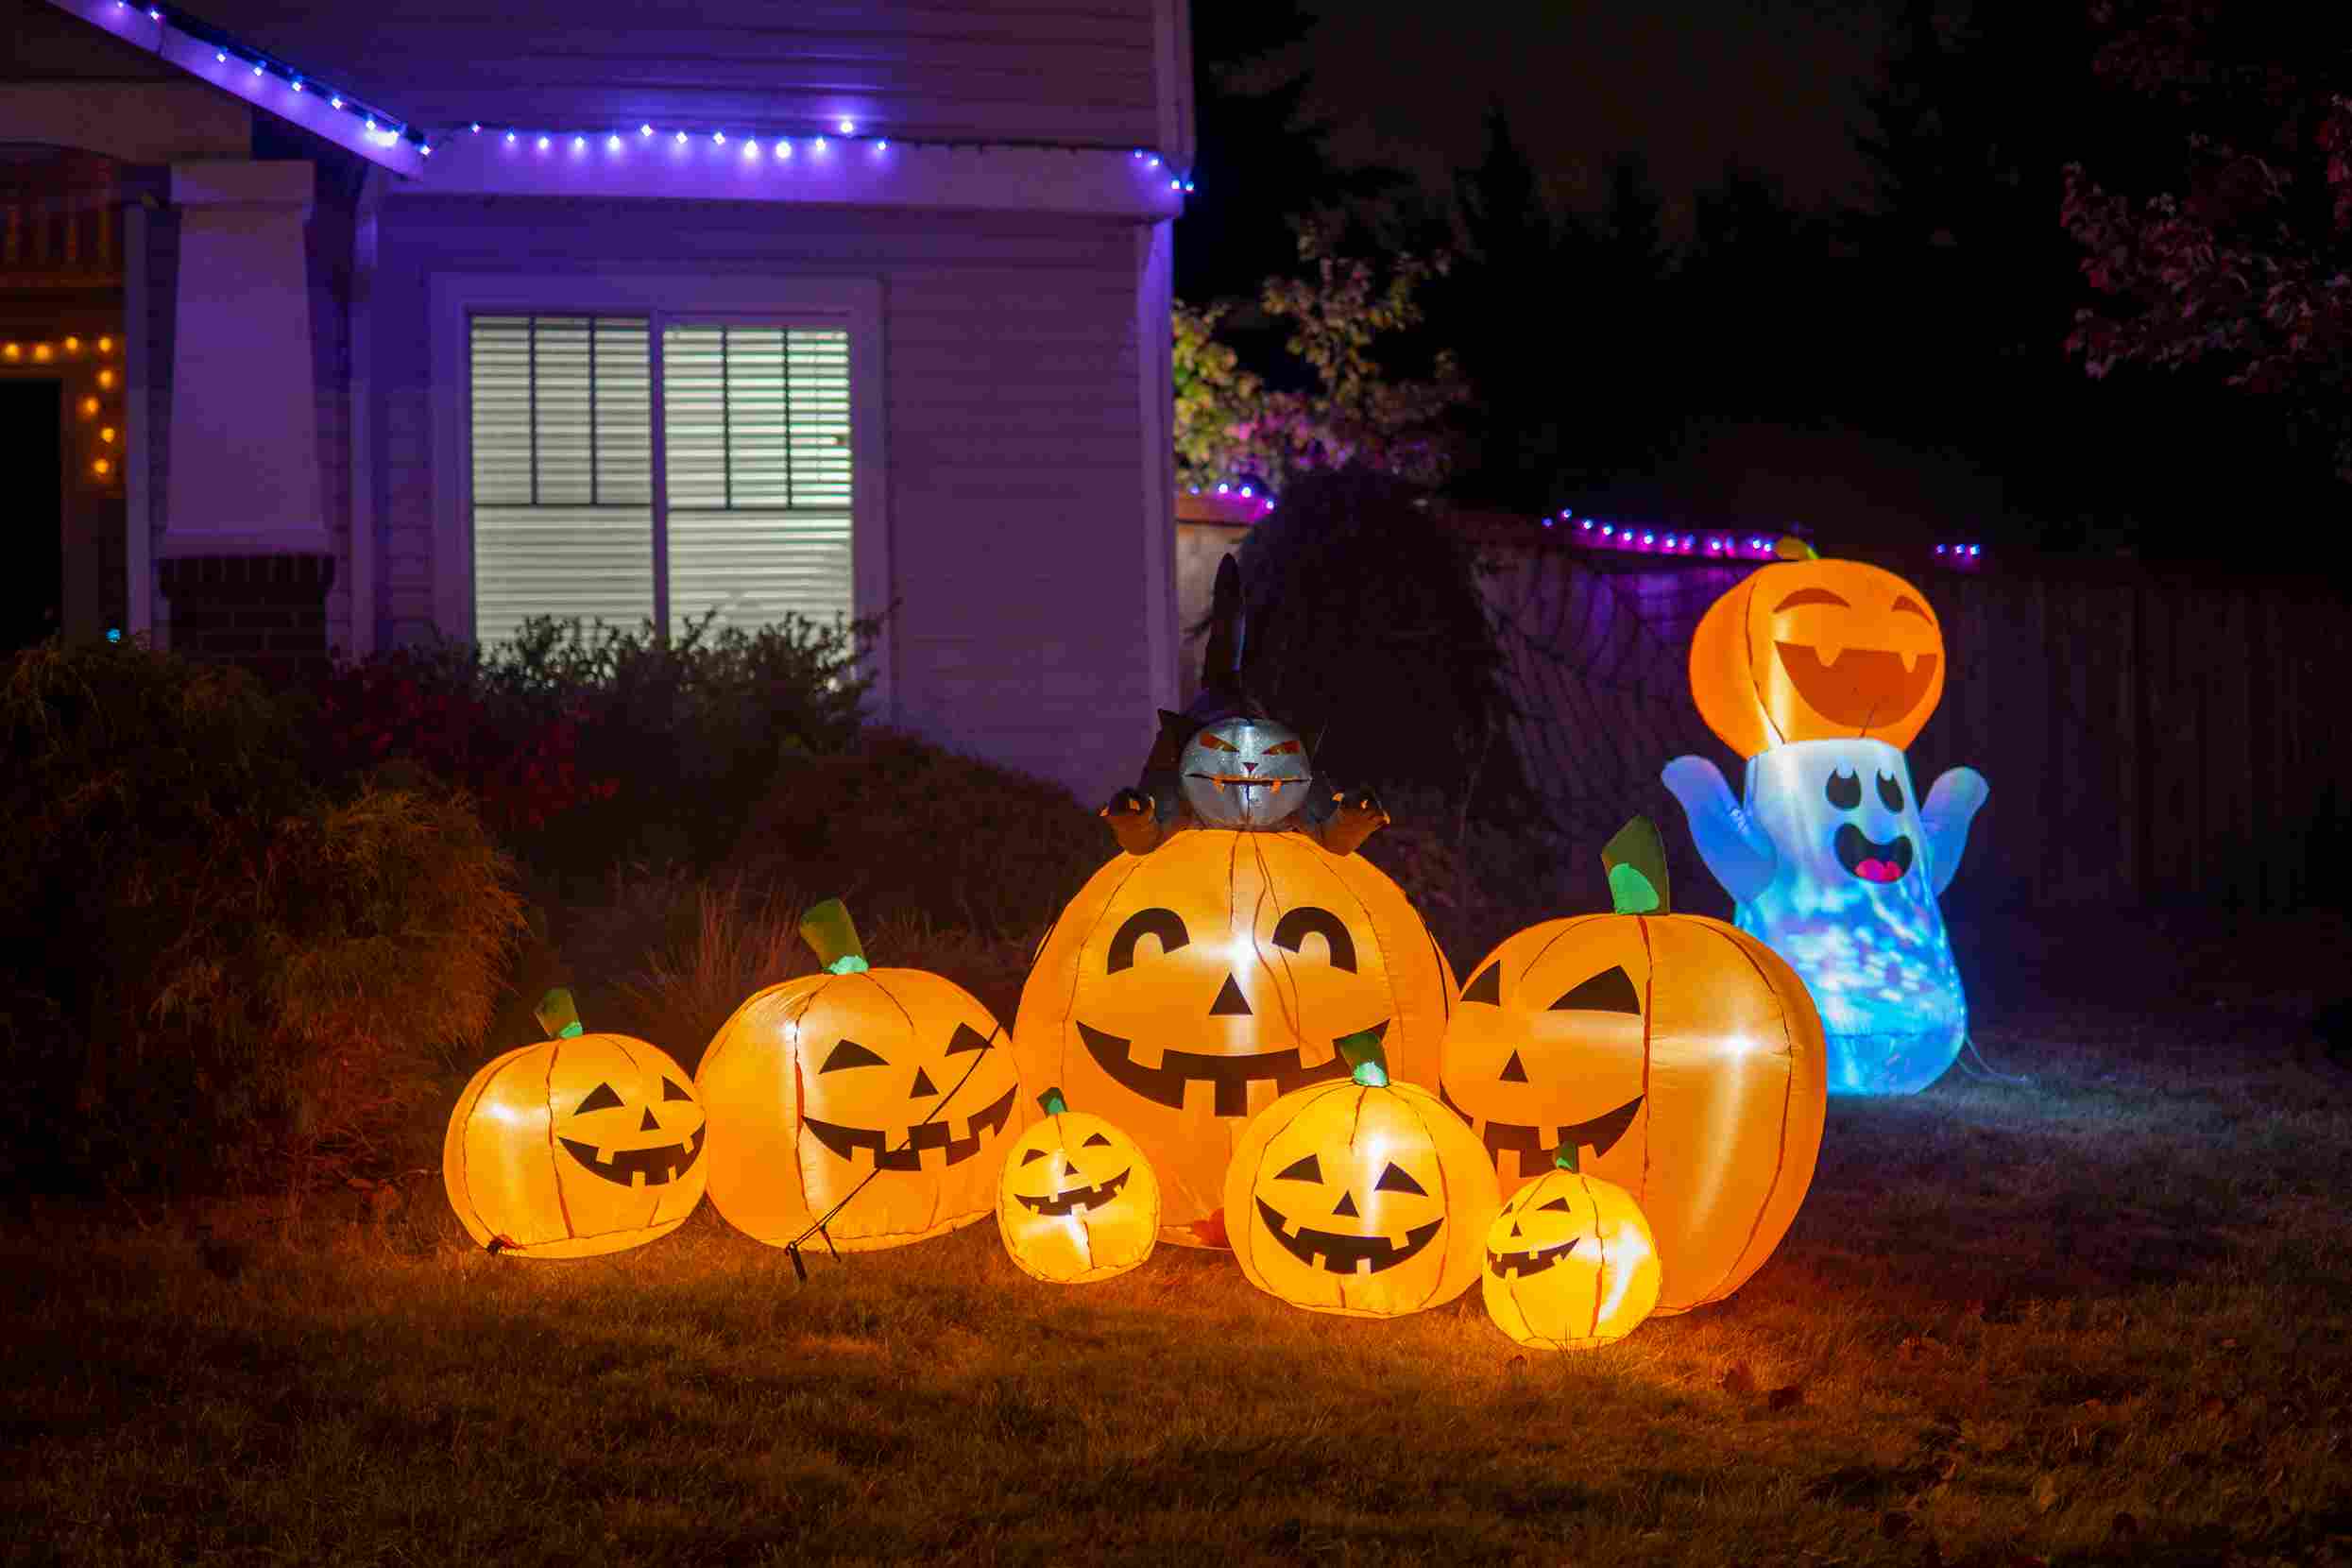 illuminated-night-halloween-house-outdoor-decorations-with-inflatable-figures-pumpkins-cat_11zon